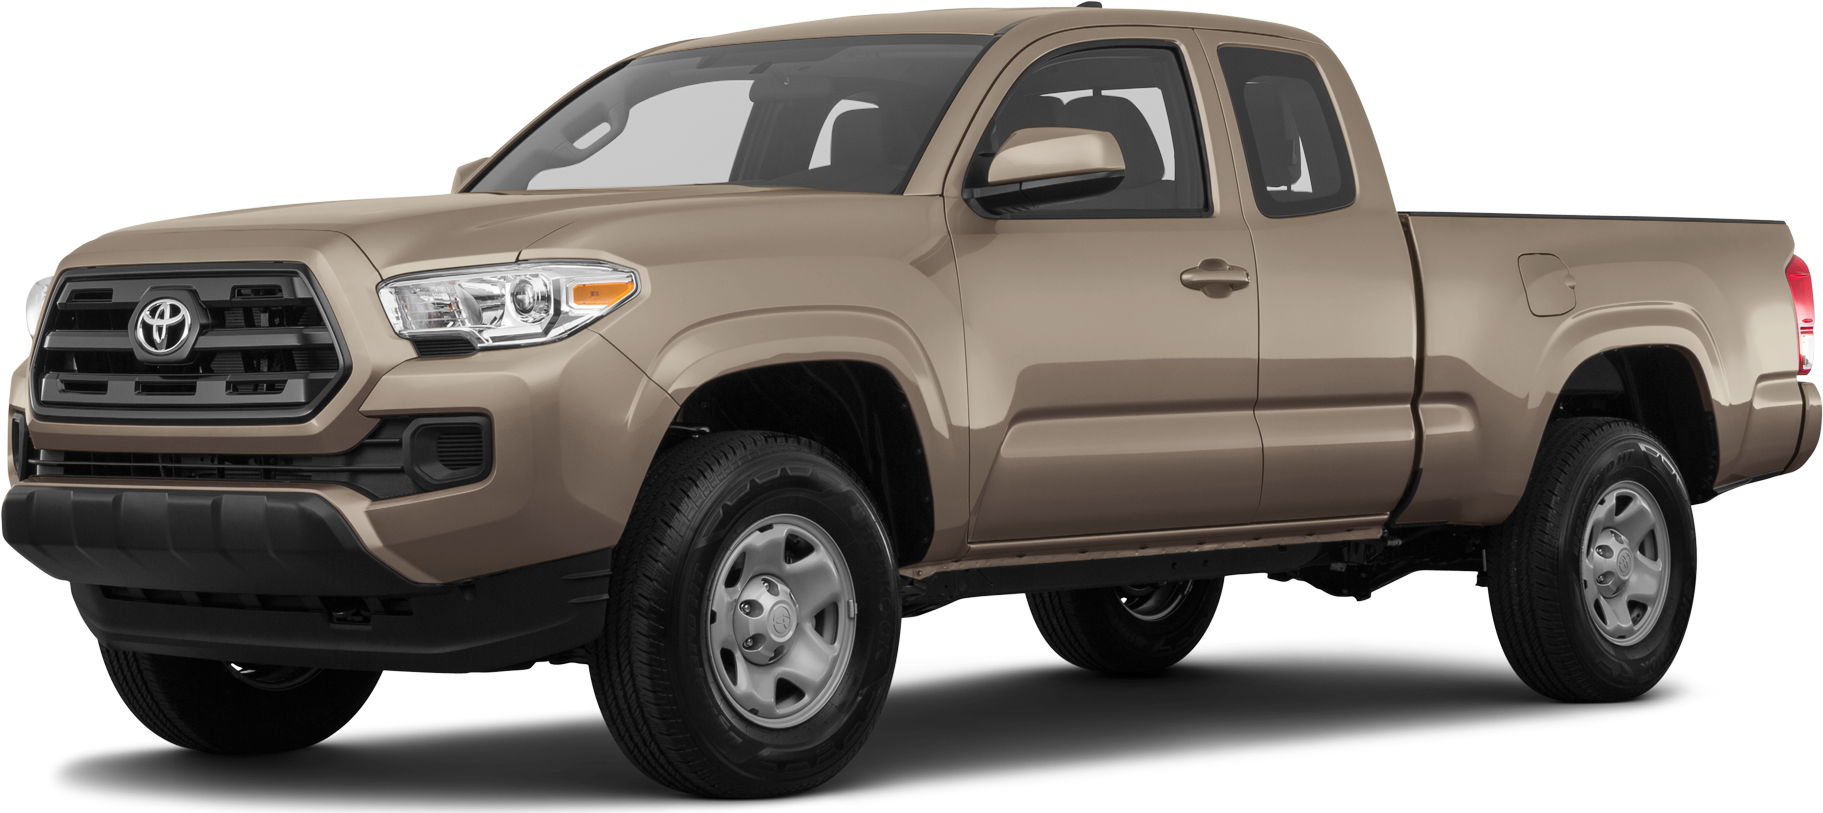 https://file.kelleybluebookimages.com/kbb/base/evox/CP/11566/2017-Toyota-Tacoma%20Access%20Cab-front_11566_032_1823x813_4V6_cropped.png